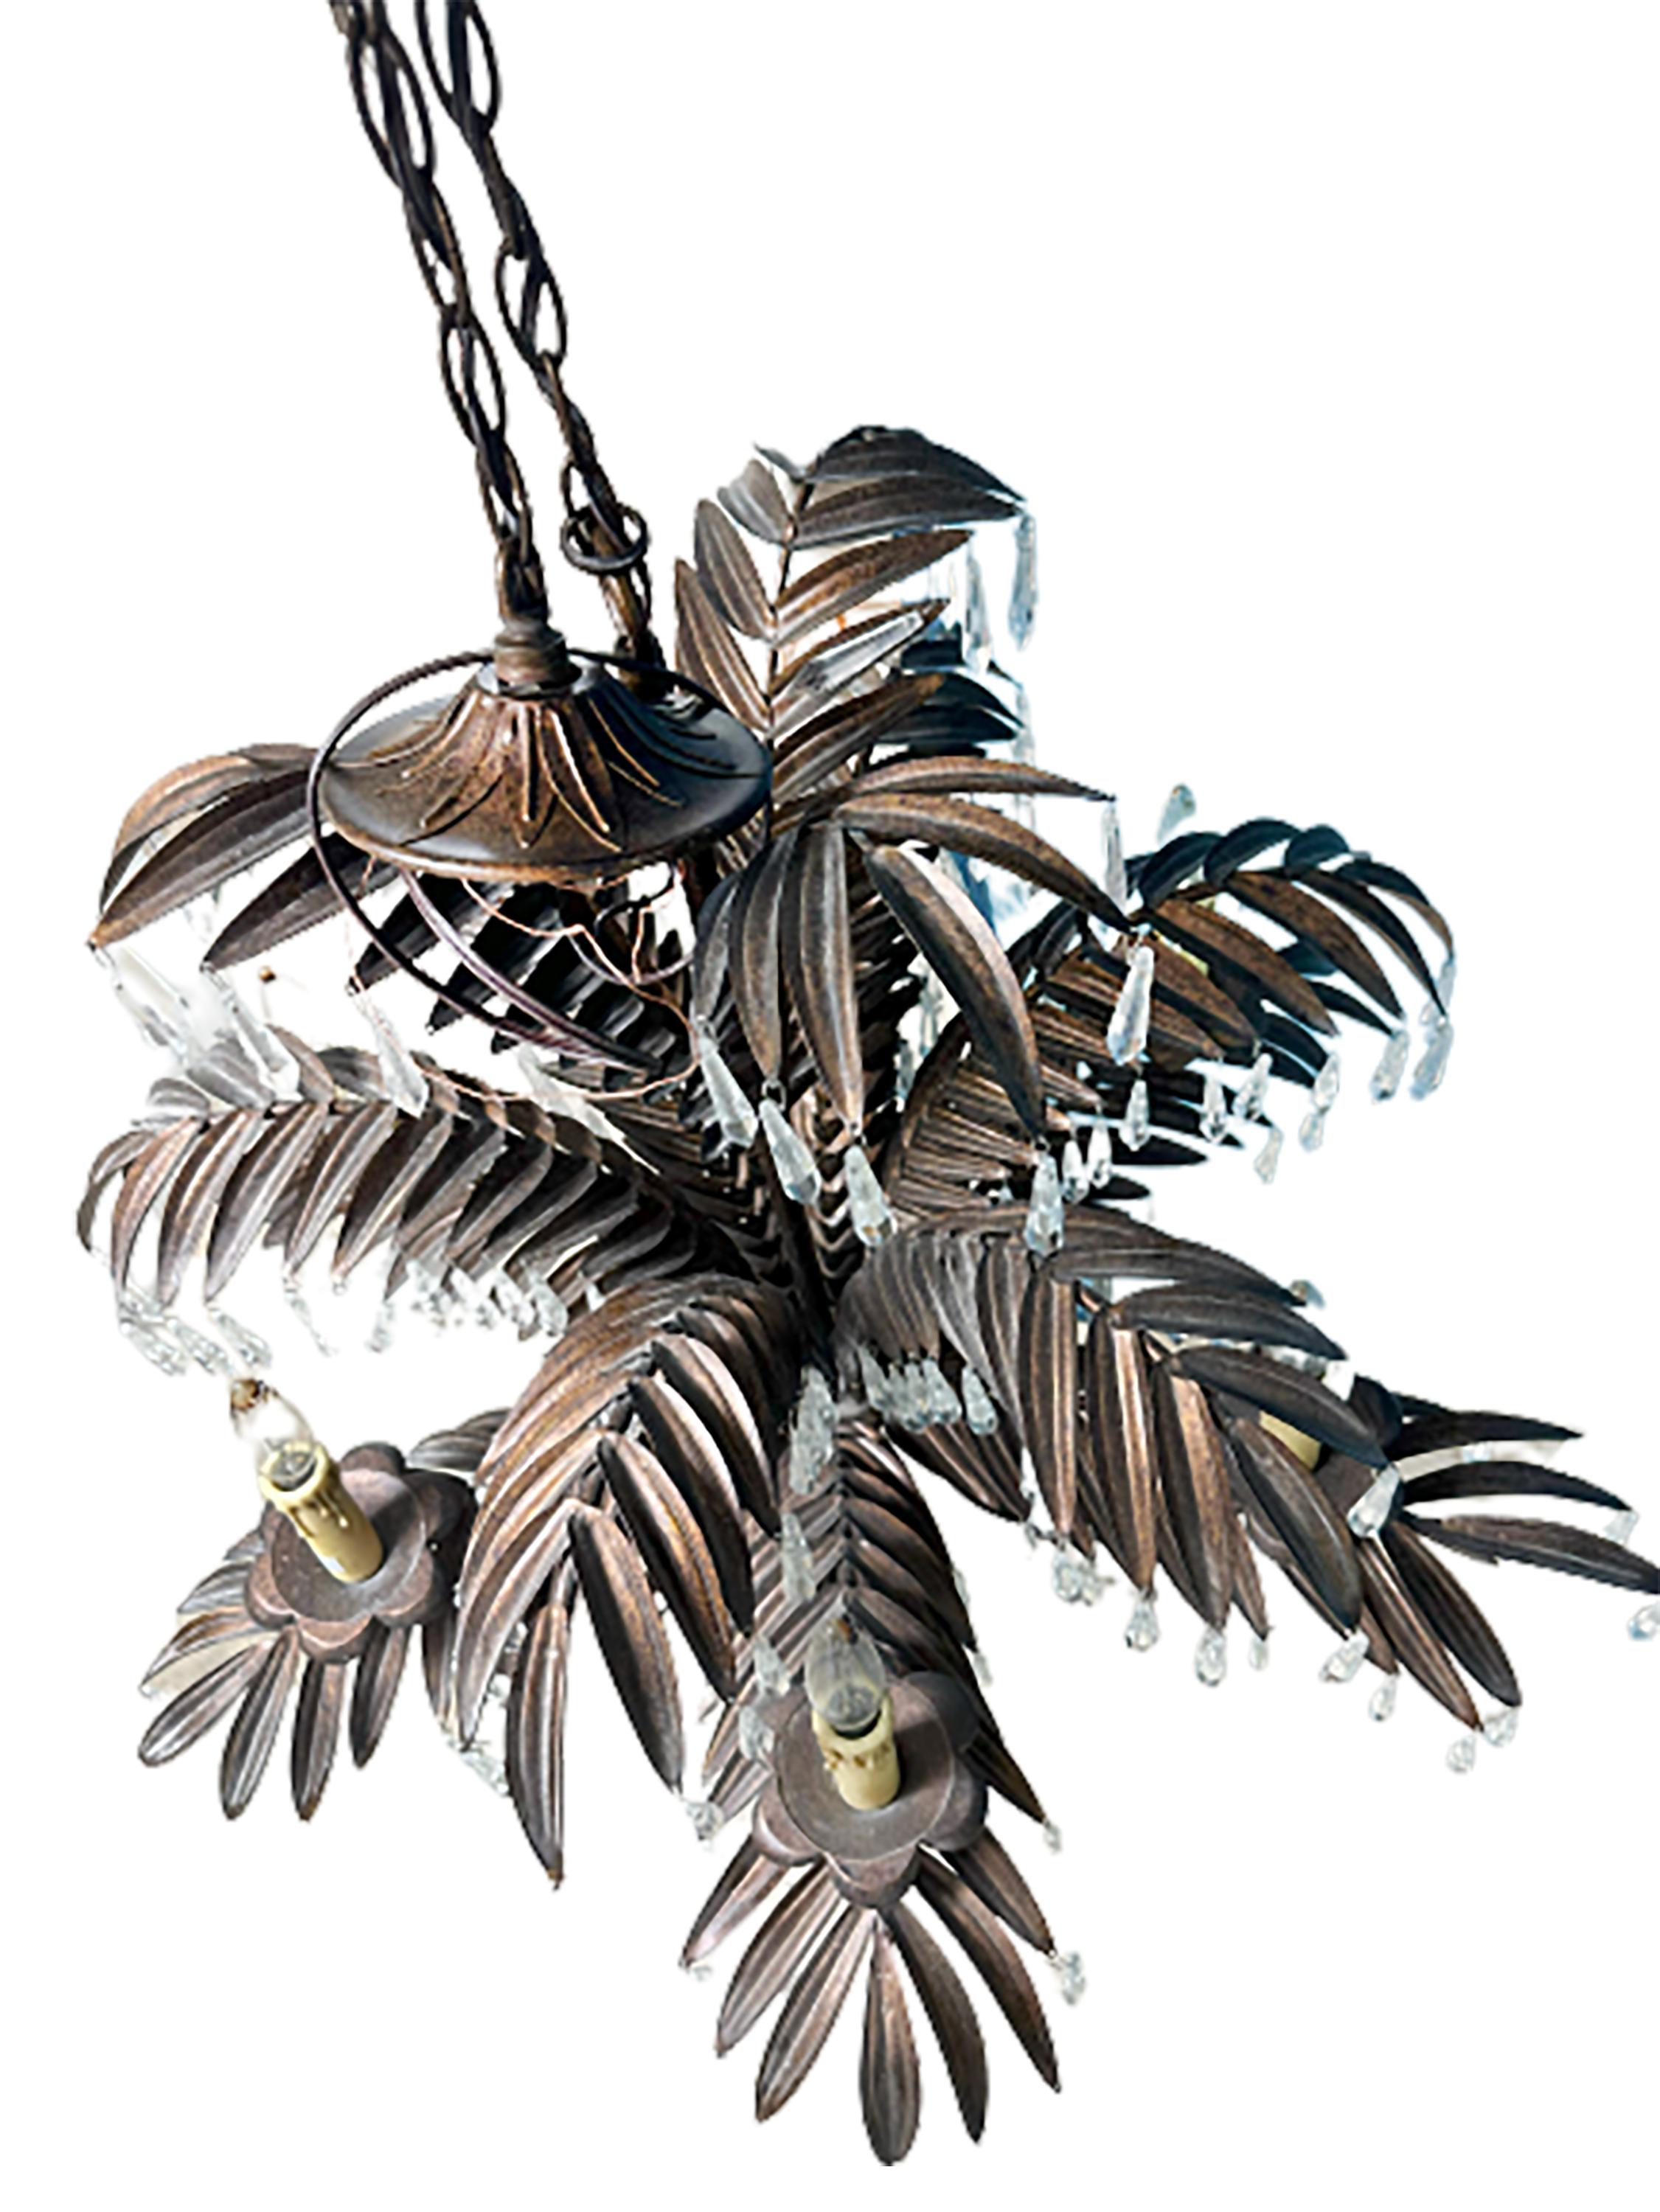 A handsome handmade palm frond chandelier. 21st century made. Iron leaf-like shapes create a lush sense of organic texture for this piece. Numerous hand cut glass crystal pieces hang down along each layer. A few faux wax candle electric lights sit